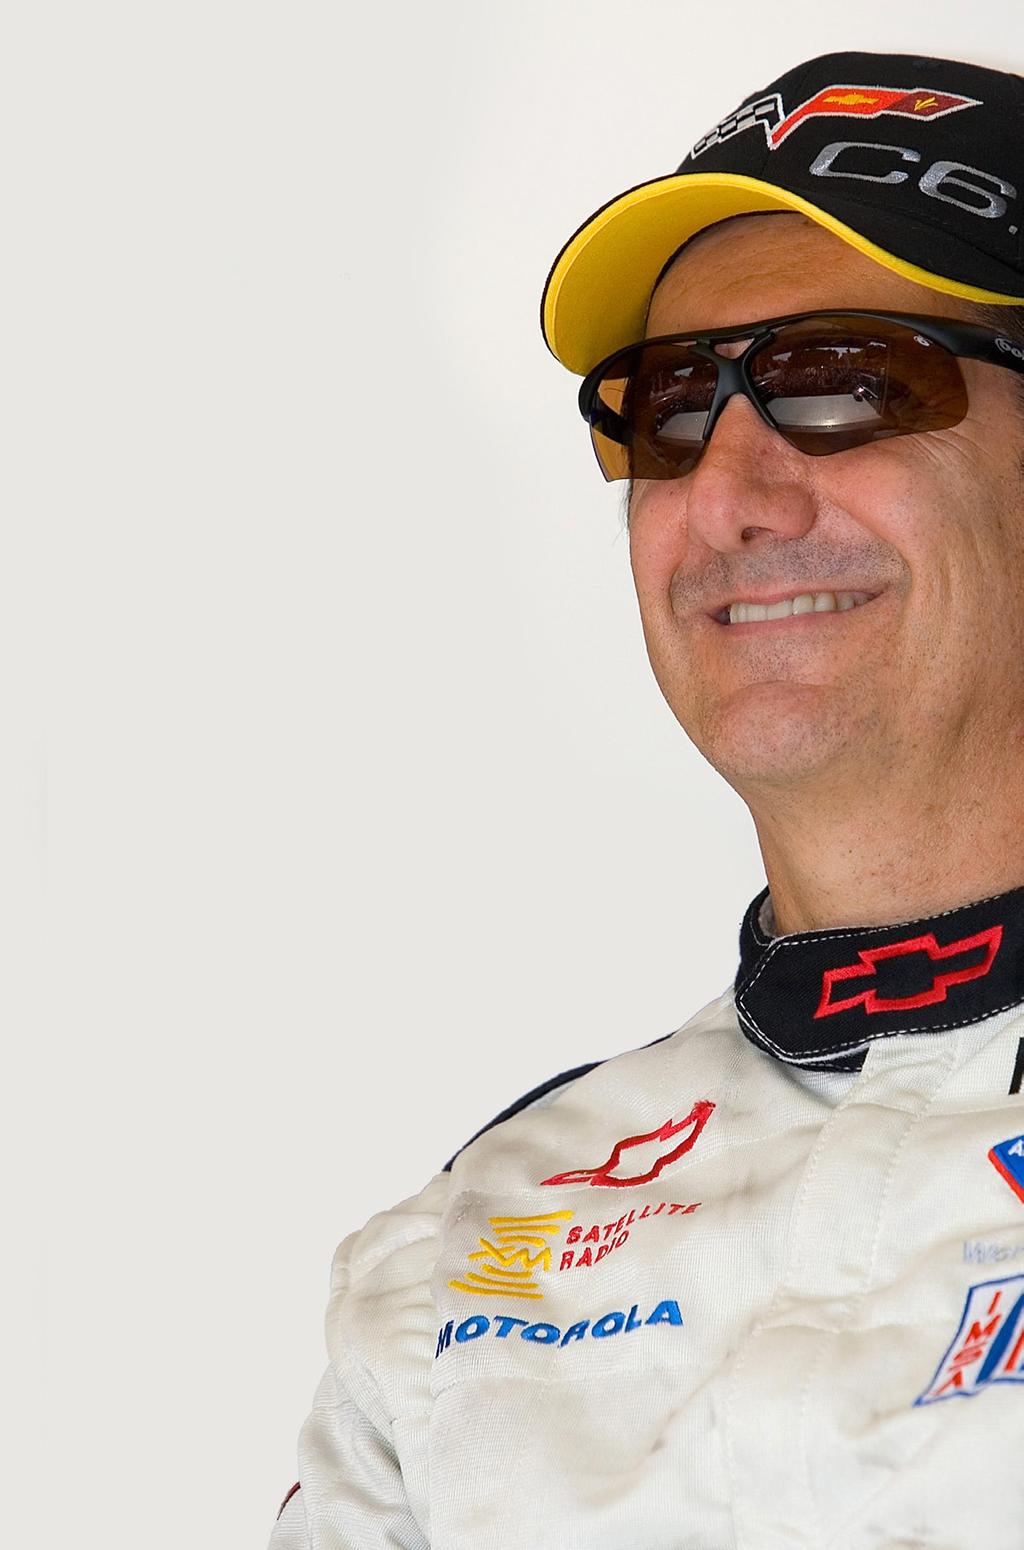 2 RON FELLOWS A CANADIAN motorsports legend and one of North America s most versatile and popular drivers, Ron Fellow is on the other side of the proverbial fence this week.